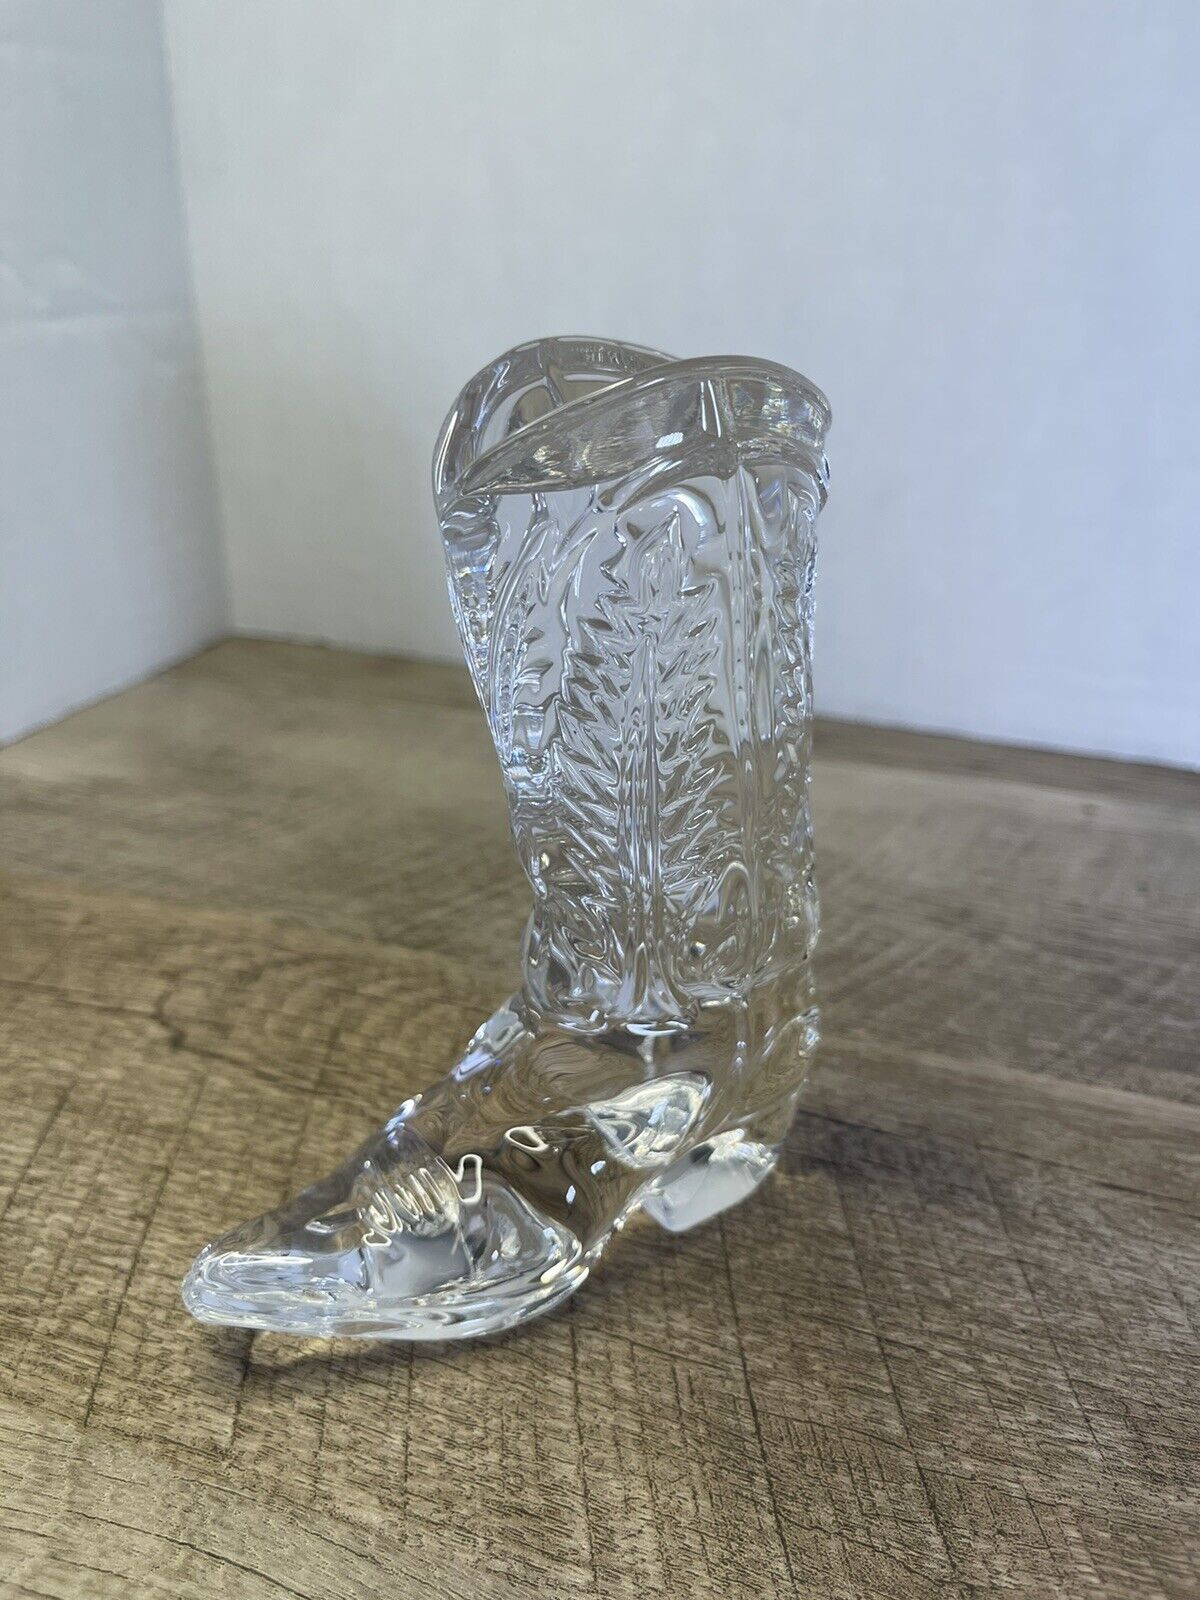 Ralph Lauren Signed Lead Crystal Cowboy Boot 5” Tall